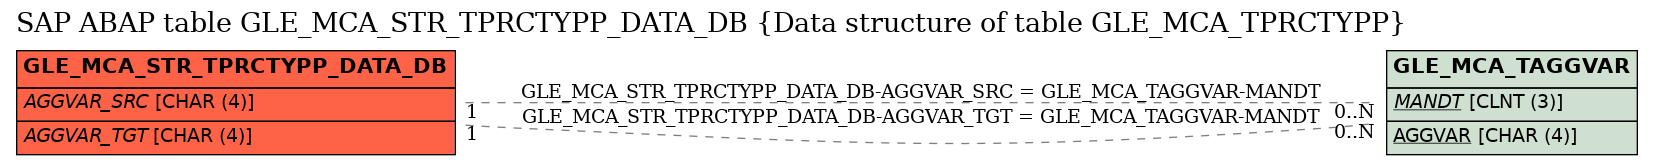 E-R Diagram for table GLE_MCA_STR_TPRCTYPP_DATA_DB (Data structure of table GLE_MCA_TPRCTYPP)